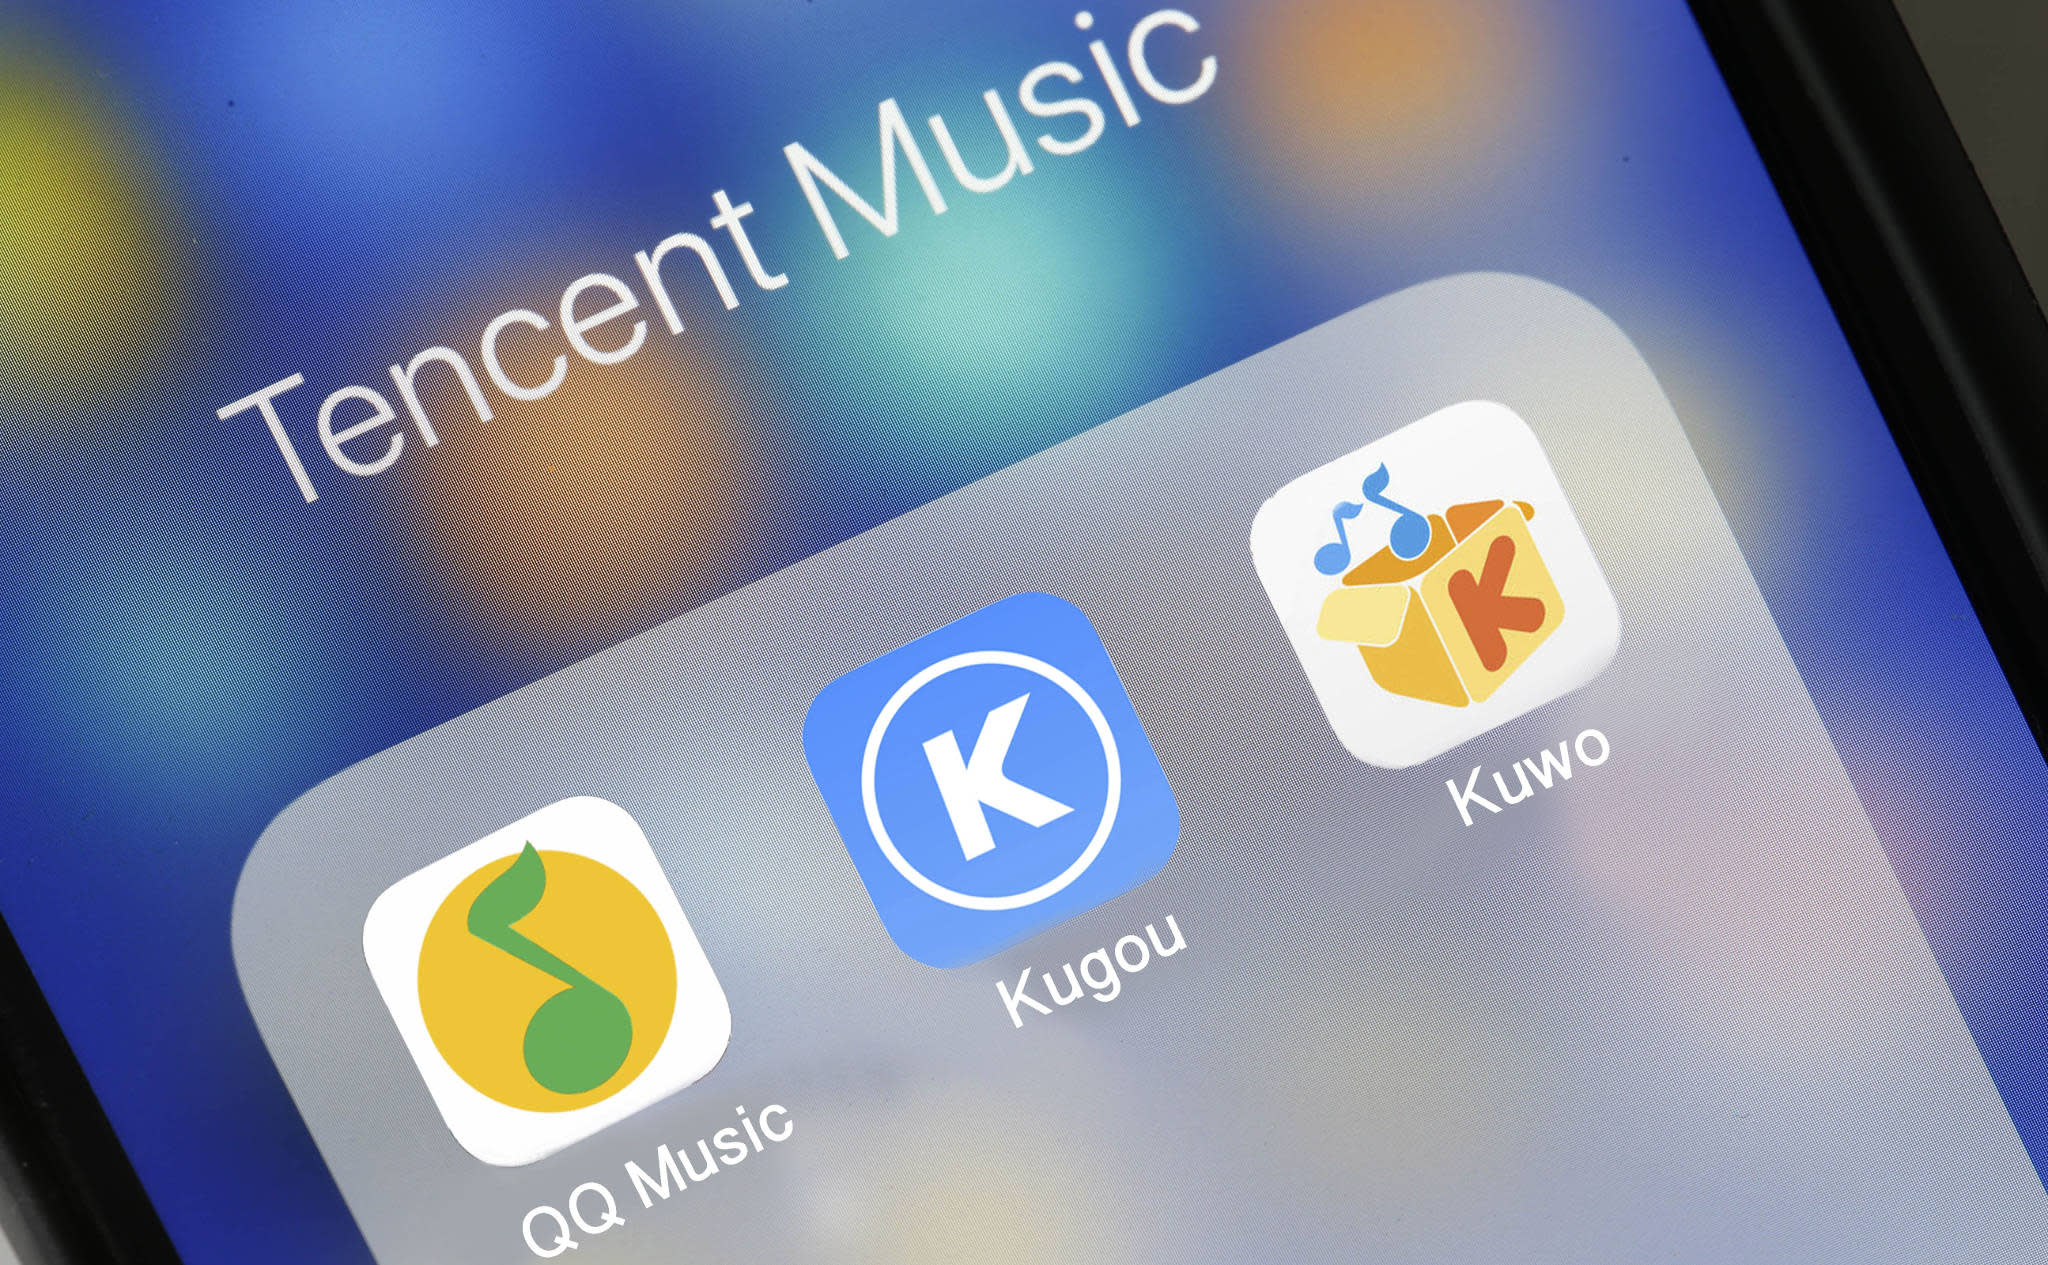 Tencent New Logo - Tencent streaming music arm files for $1bn US listing - Nikkei Asian ...